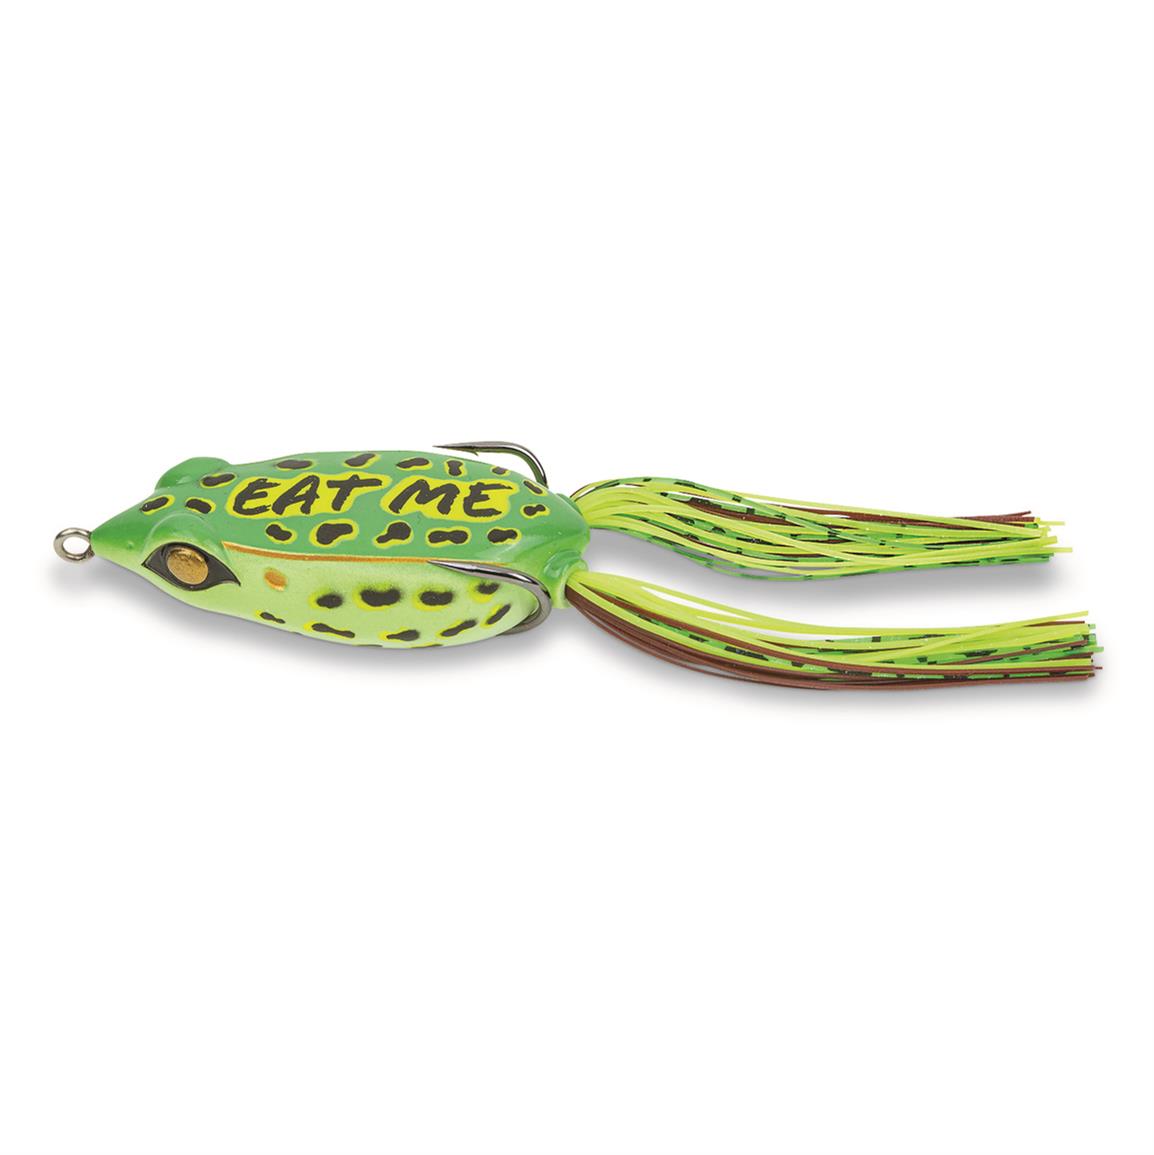 Terminator Popping Frog - 732658, Top Water Baits at Sportsman's Guide